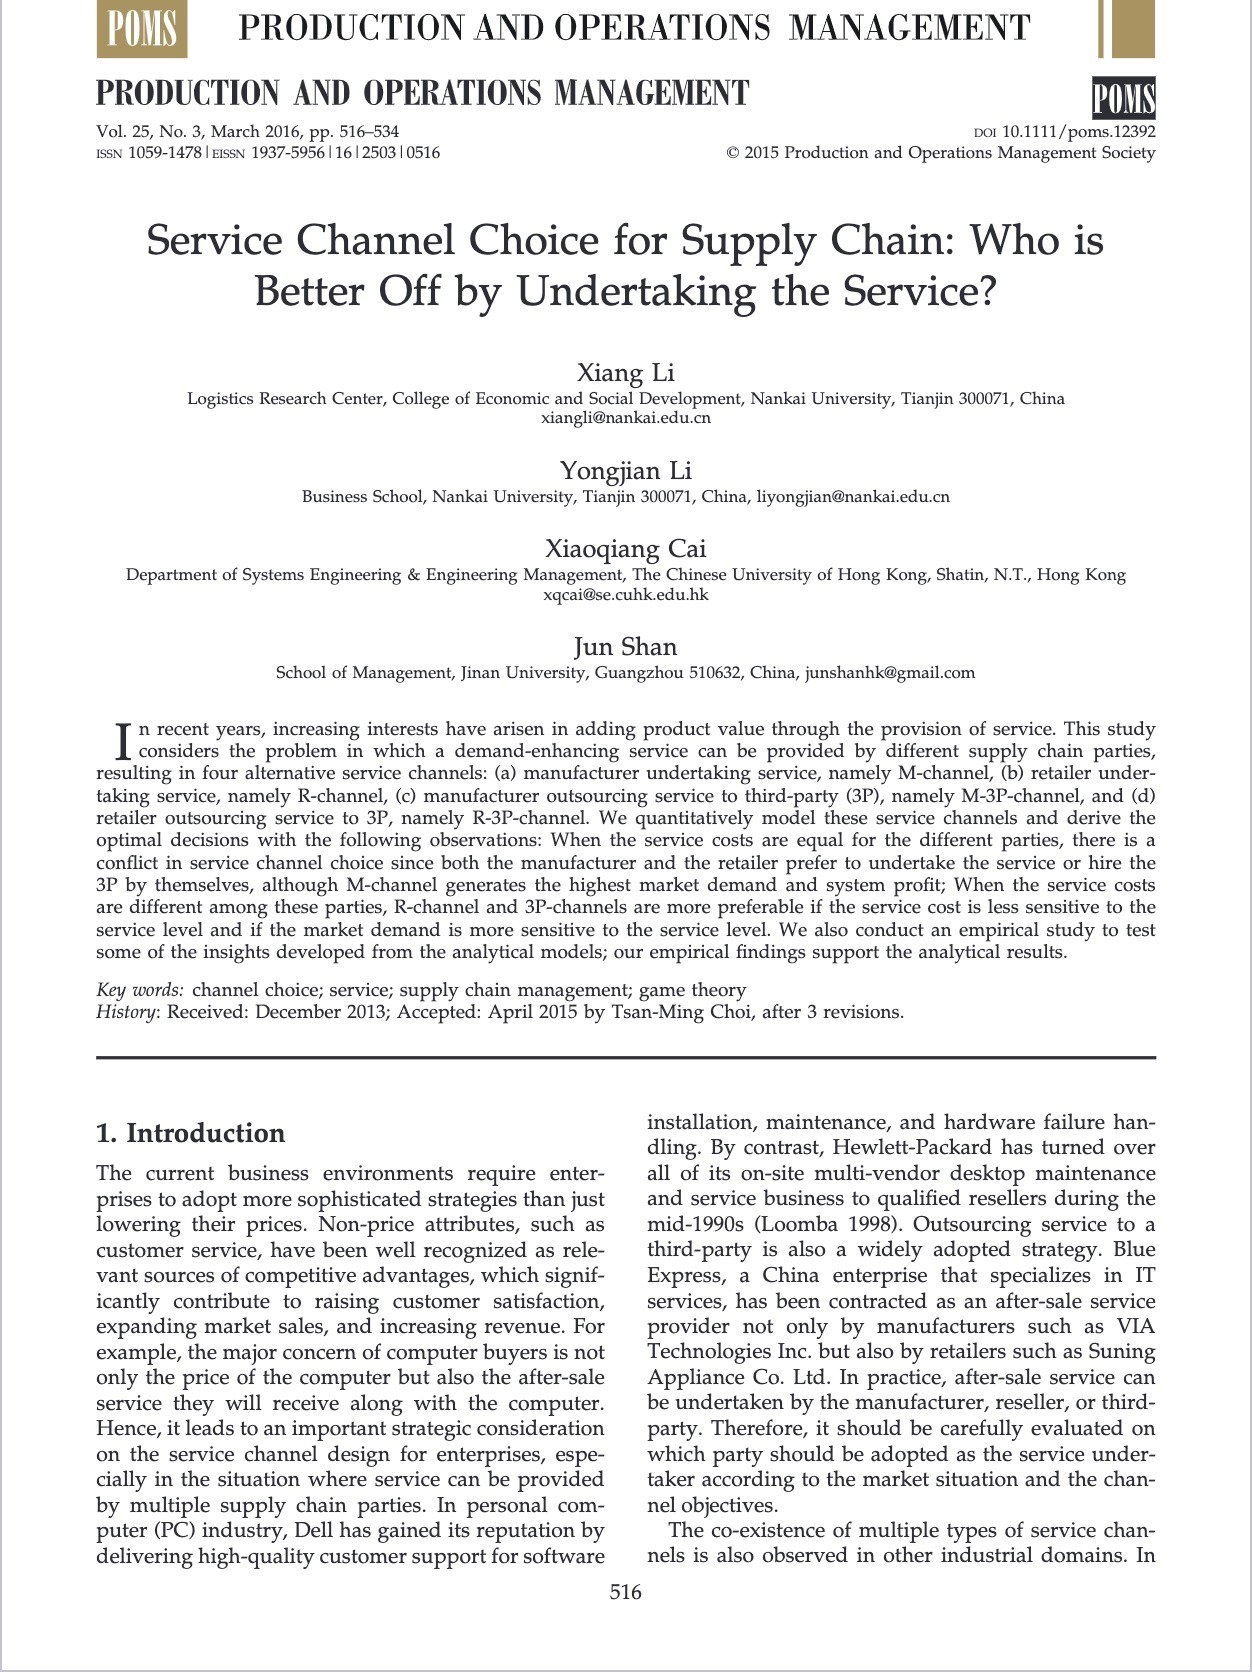 Service Channel Choice for the Supply Chain: Who is Betteroff by Undertaking the Service?